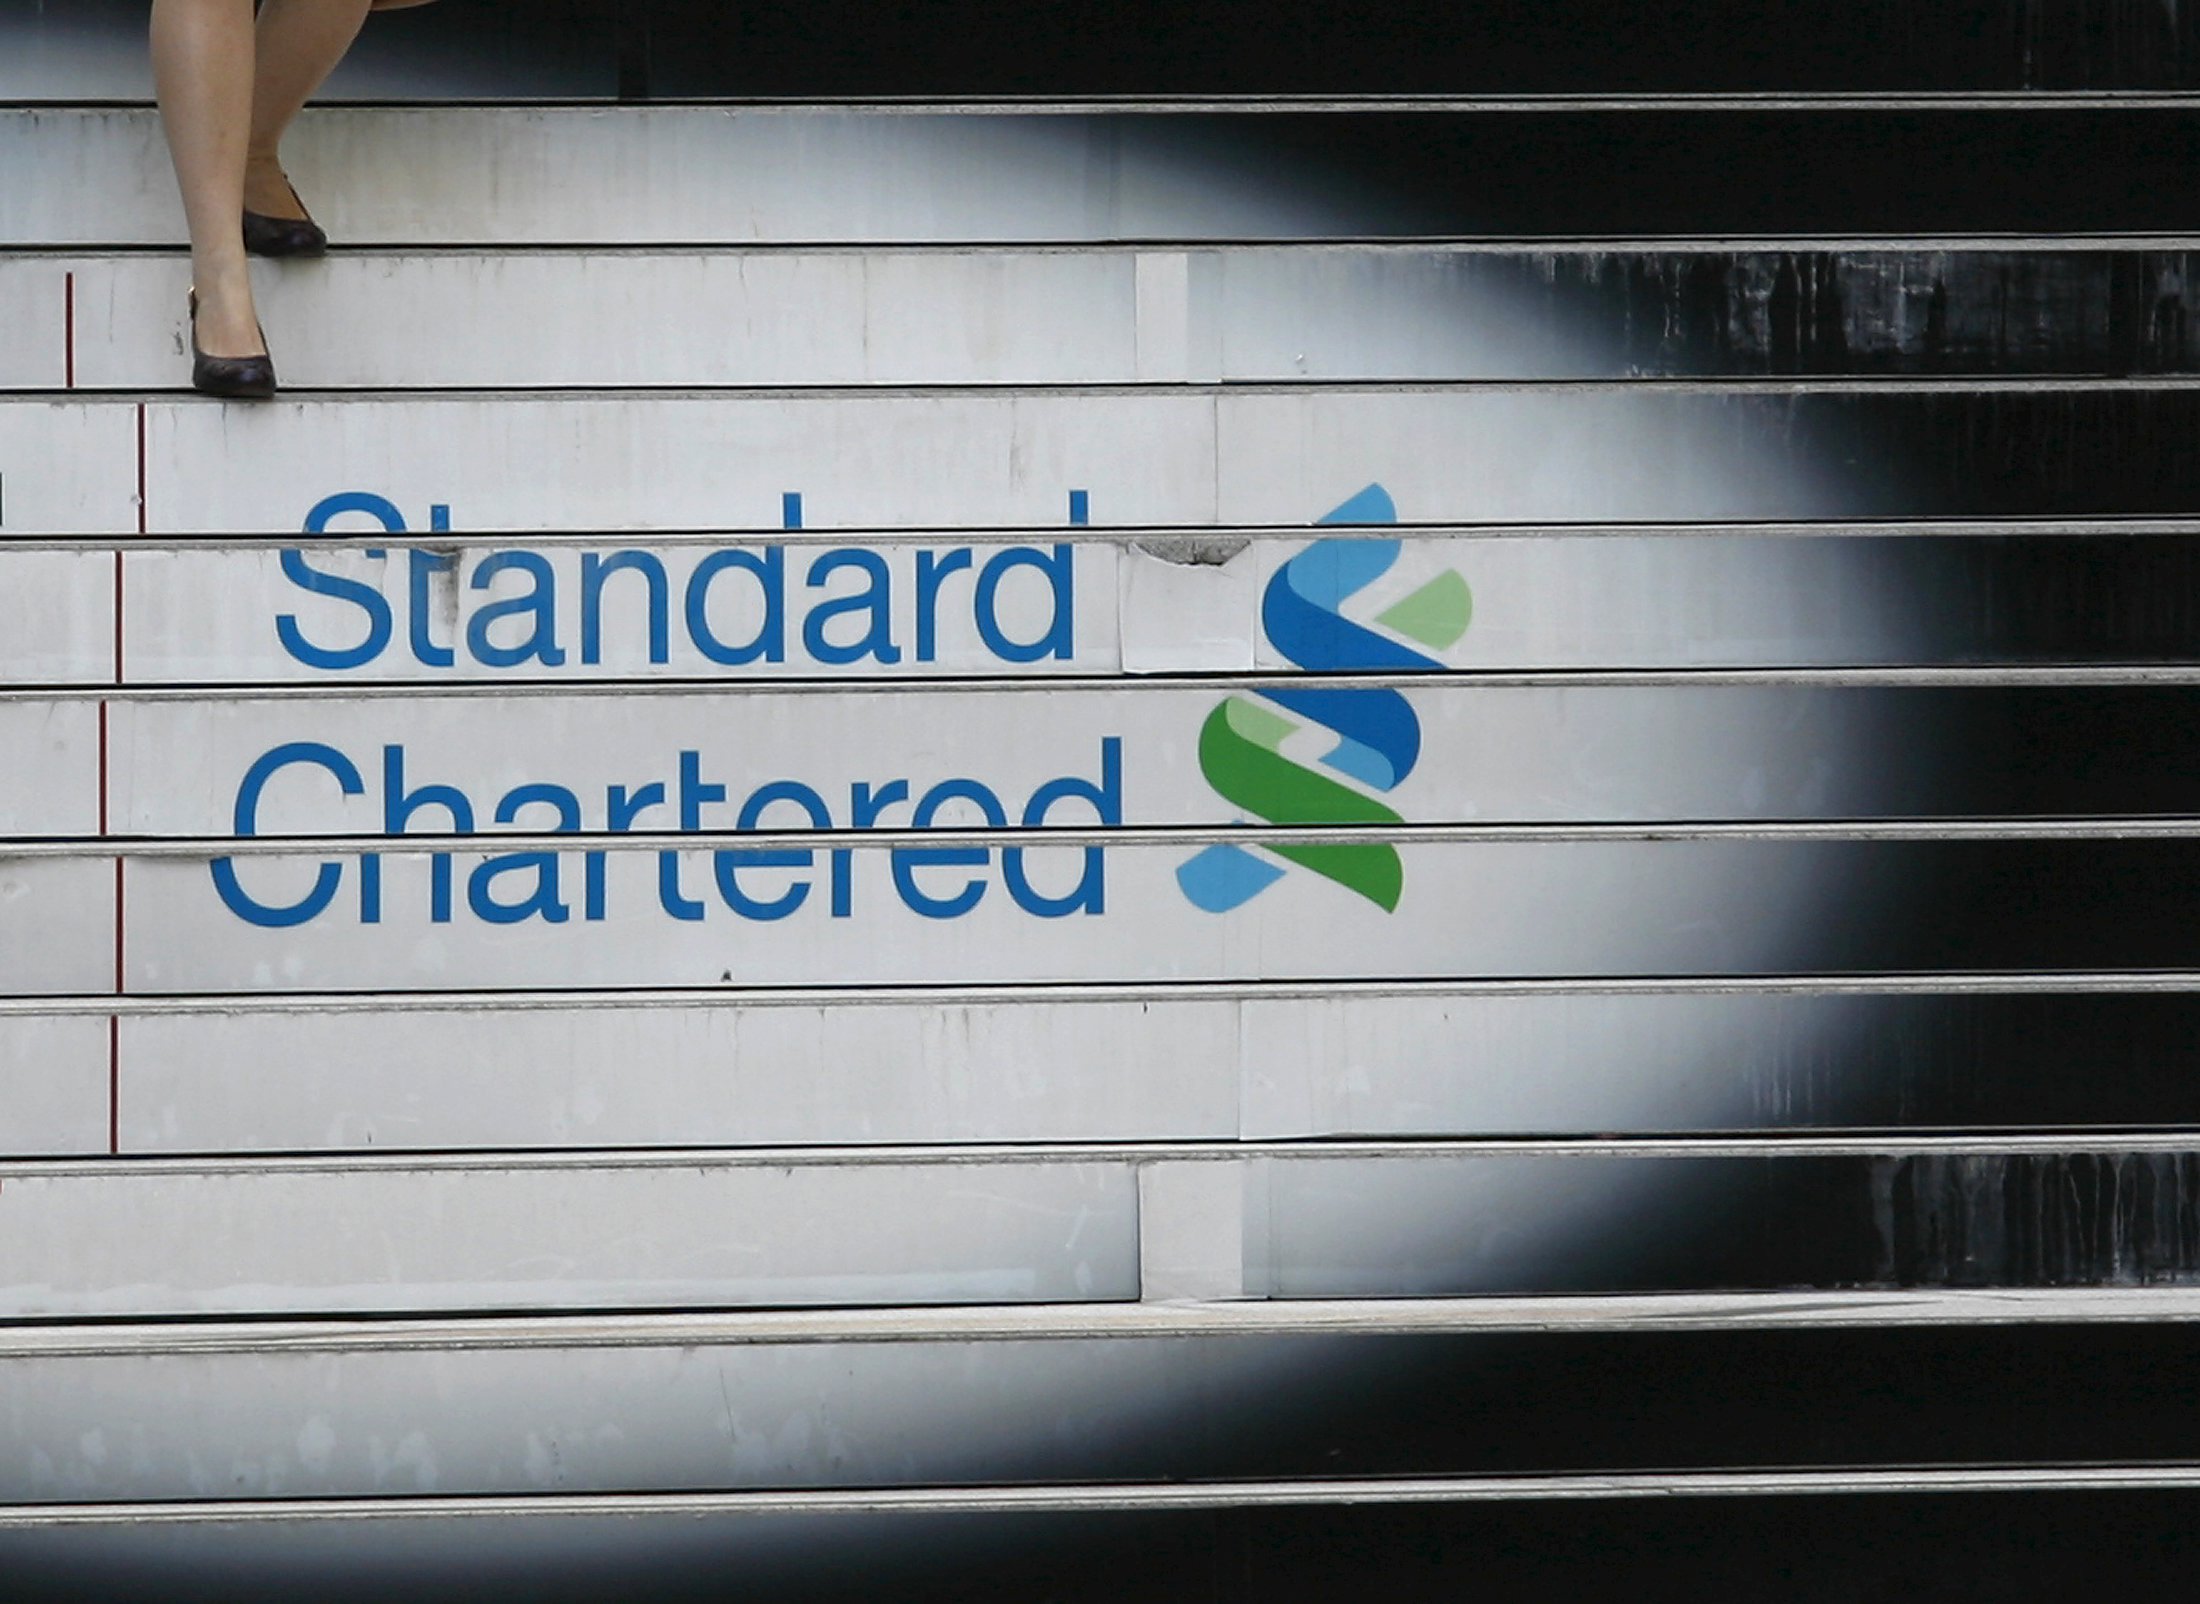 A woman walks down the stairs of the Standard Chartered headquarters in Hong Kong in this October 13, 2010 file photo. Standard Chartered is expected to report Q3 results this week. REUTERS/Bobby Yip/Files GLOBAL BUSINESS WEEK AHEAD PACKAGESEARCH "BUSINESS WEEK AHEAD NOV 2" FOR ALL 82 IMAGES